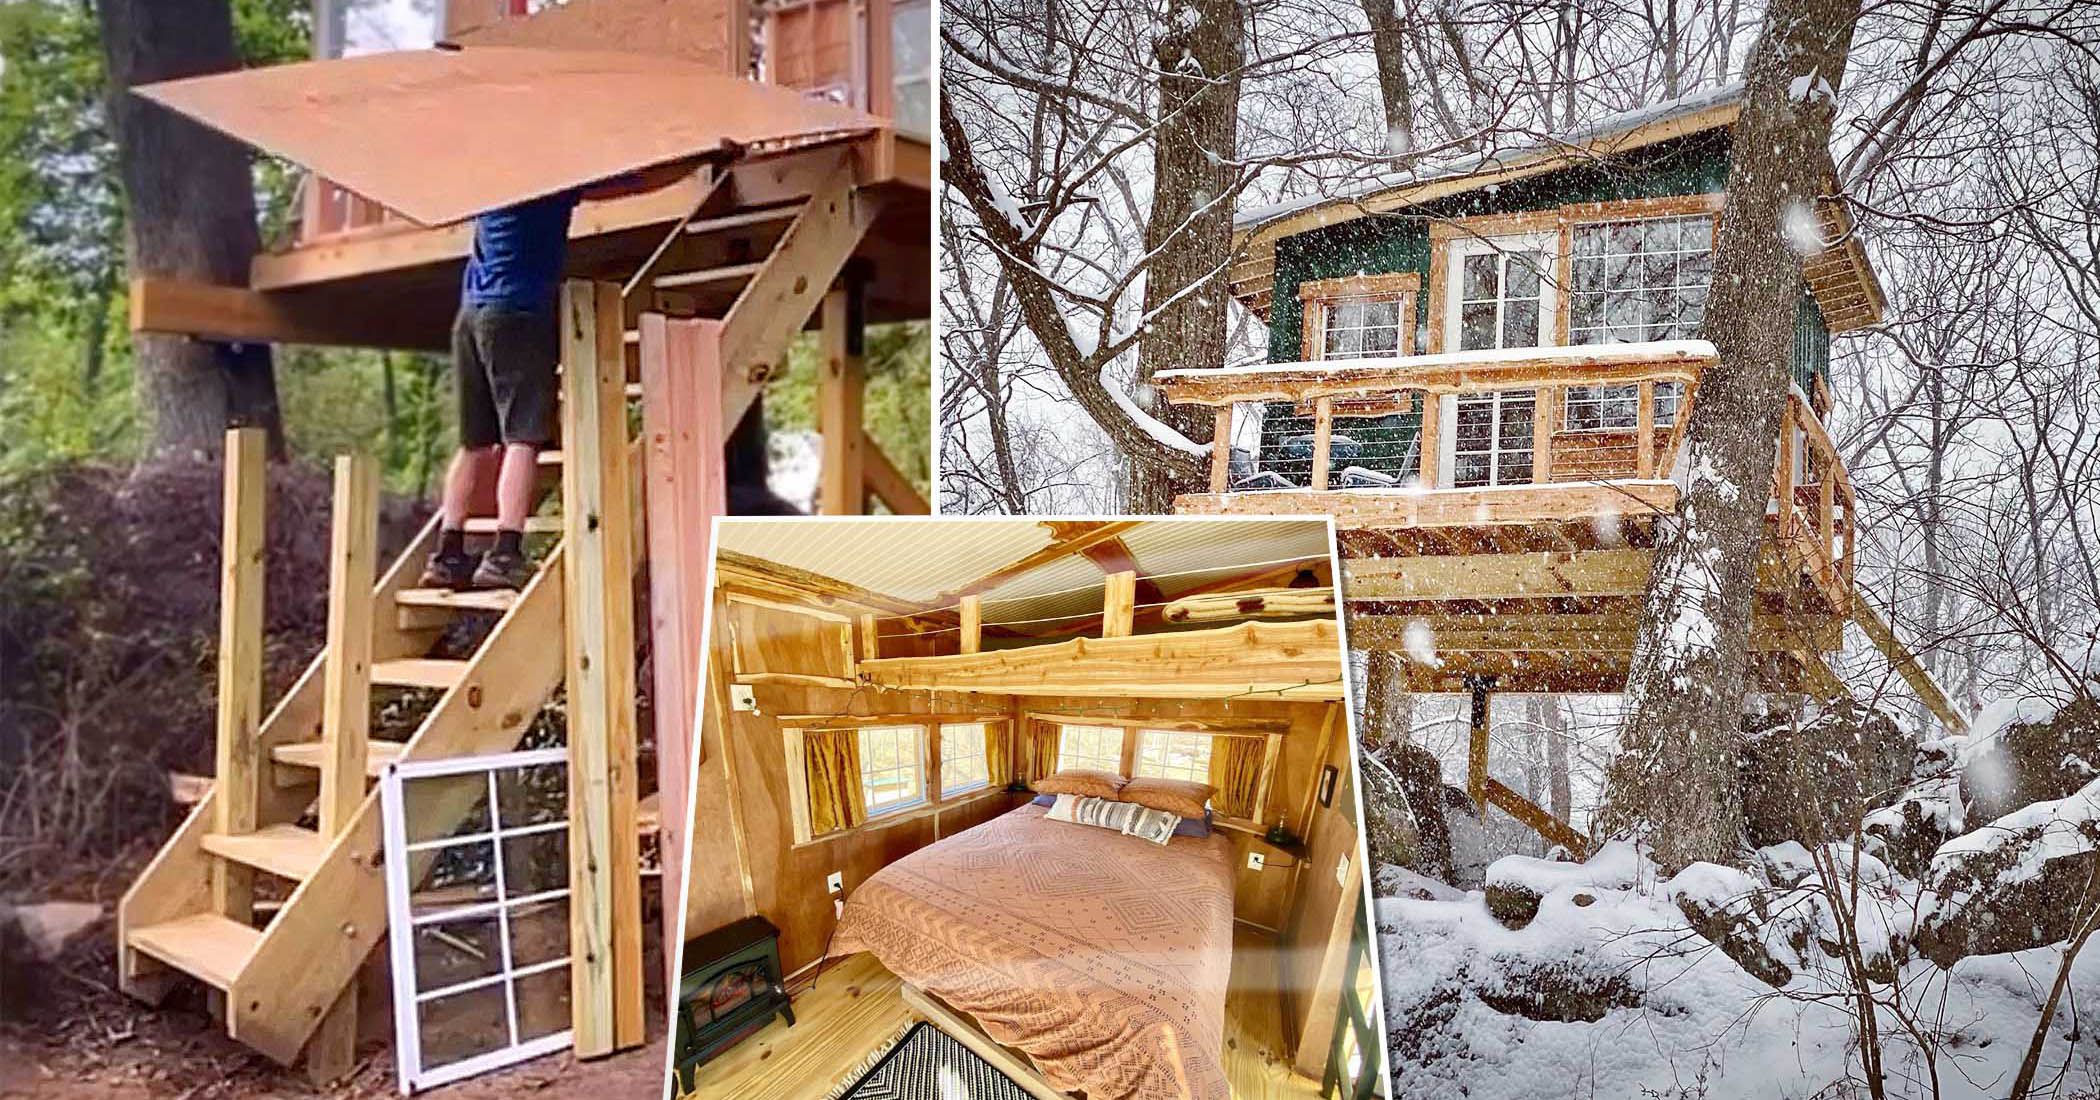 Couple Build Their Own Airbnb In A Tree From Scratch, Business Is Booming And It’s Ultra-Comfortable